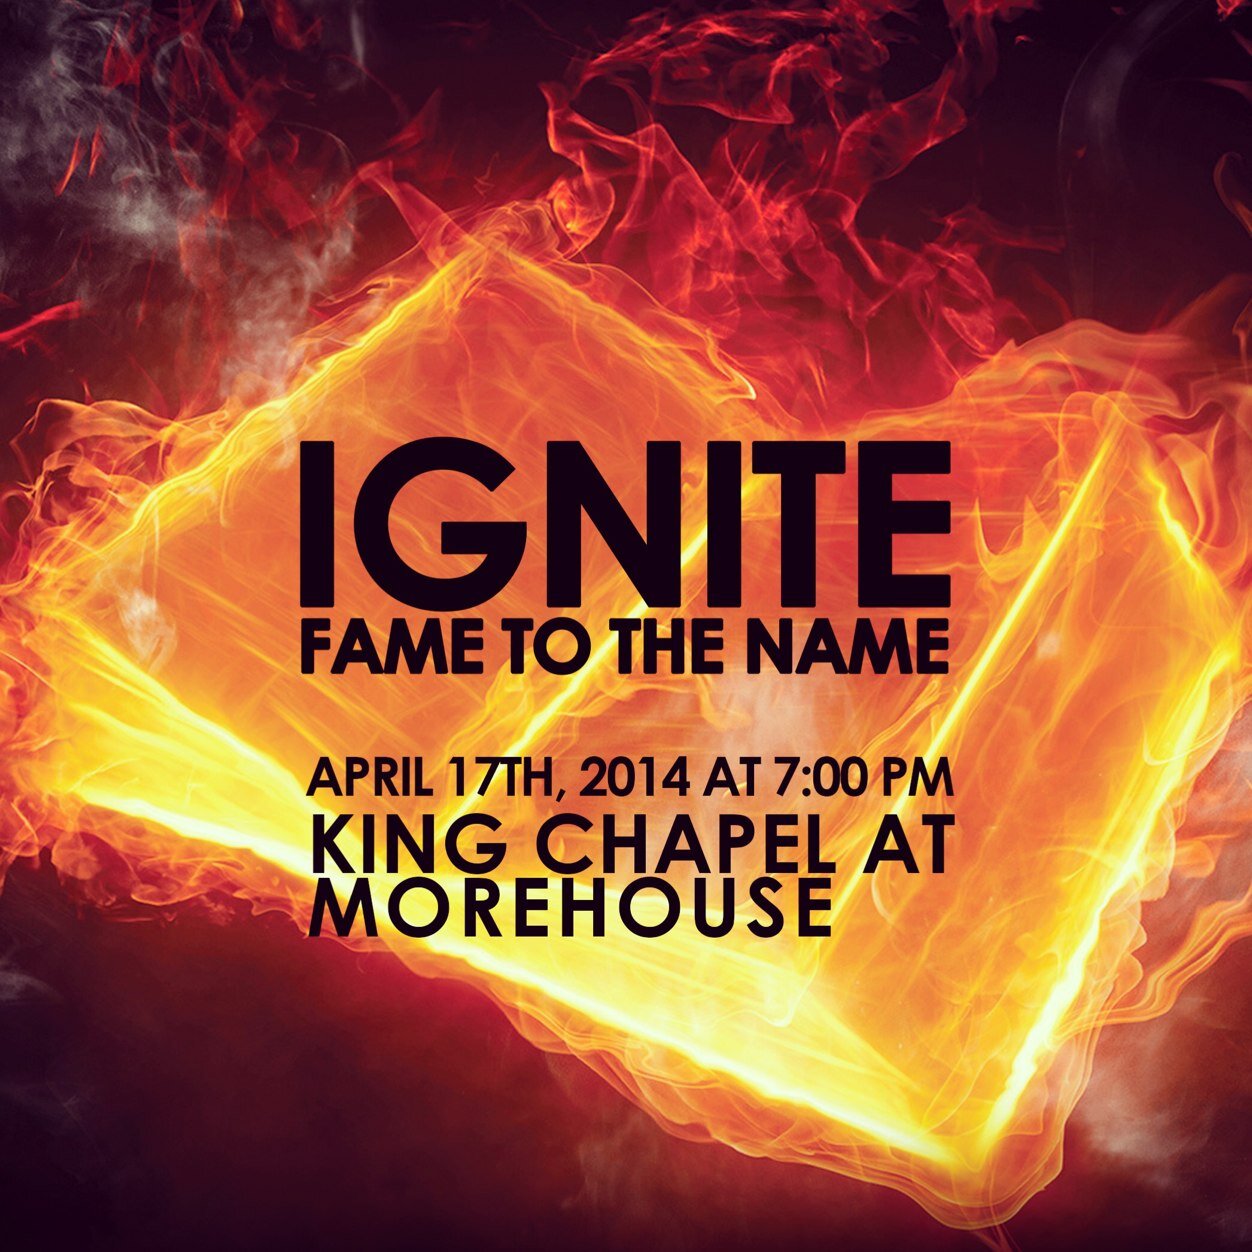 April 17, 2014 7pm in King Chapel at Morehouse College! Come experience an encounter with God like you've never had before!! #ignite #fametothename